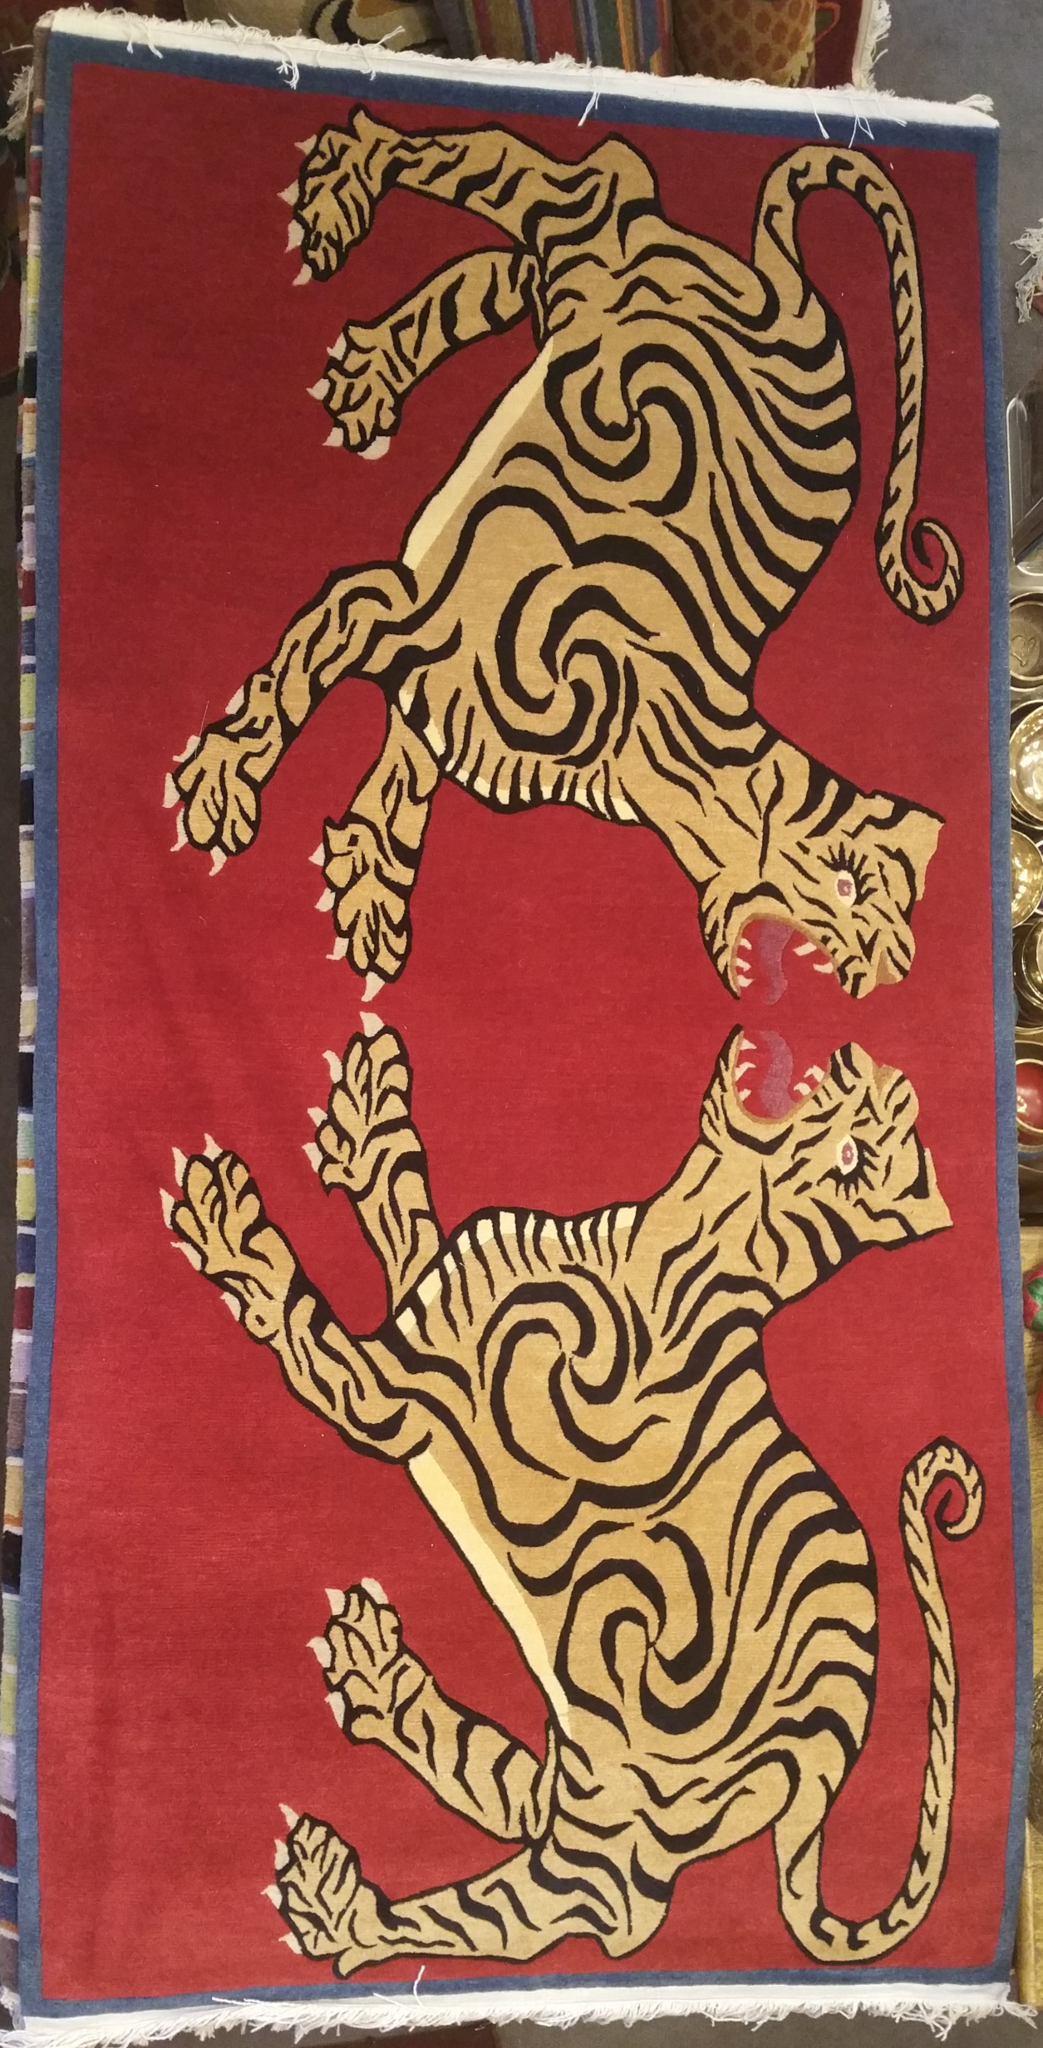 Handknotted Swirling Tiger Rug, 3'6x5